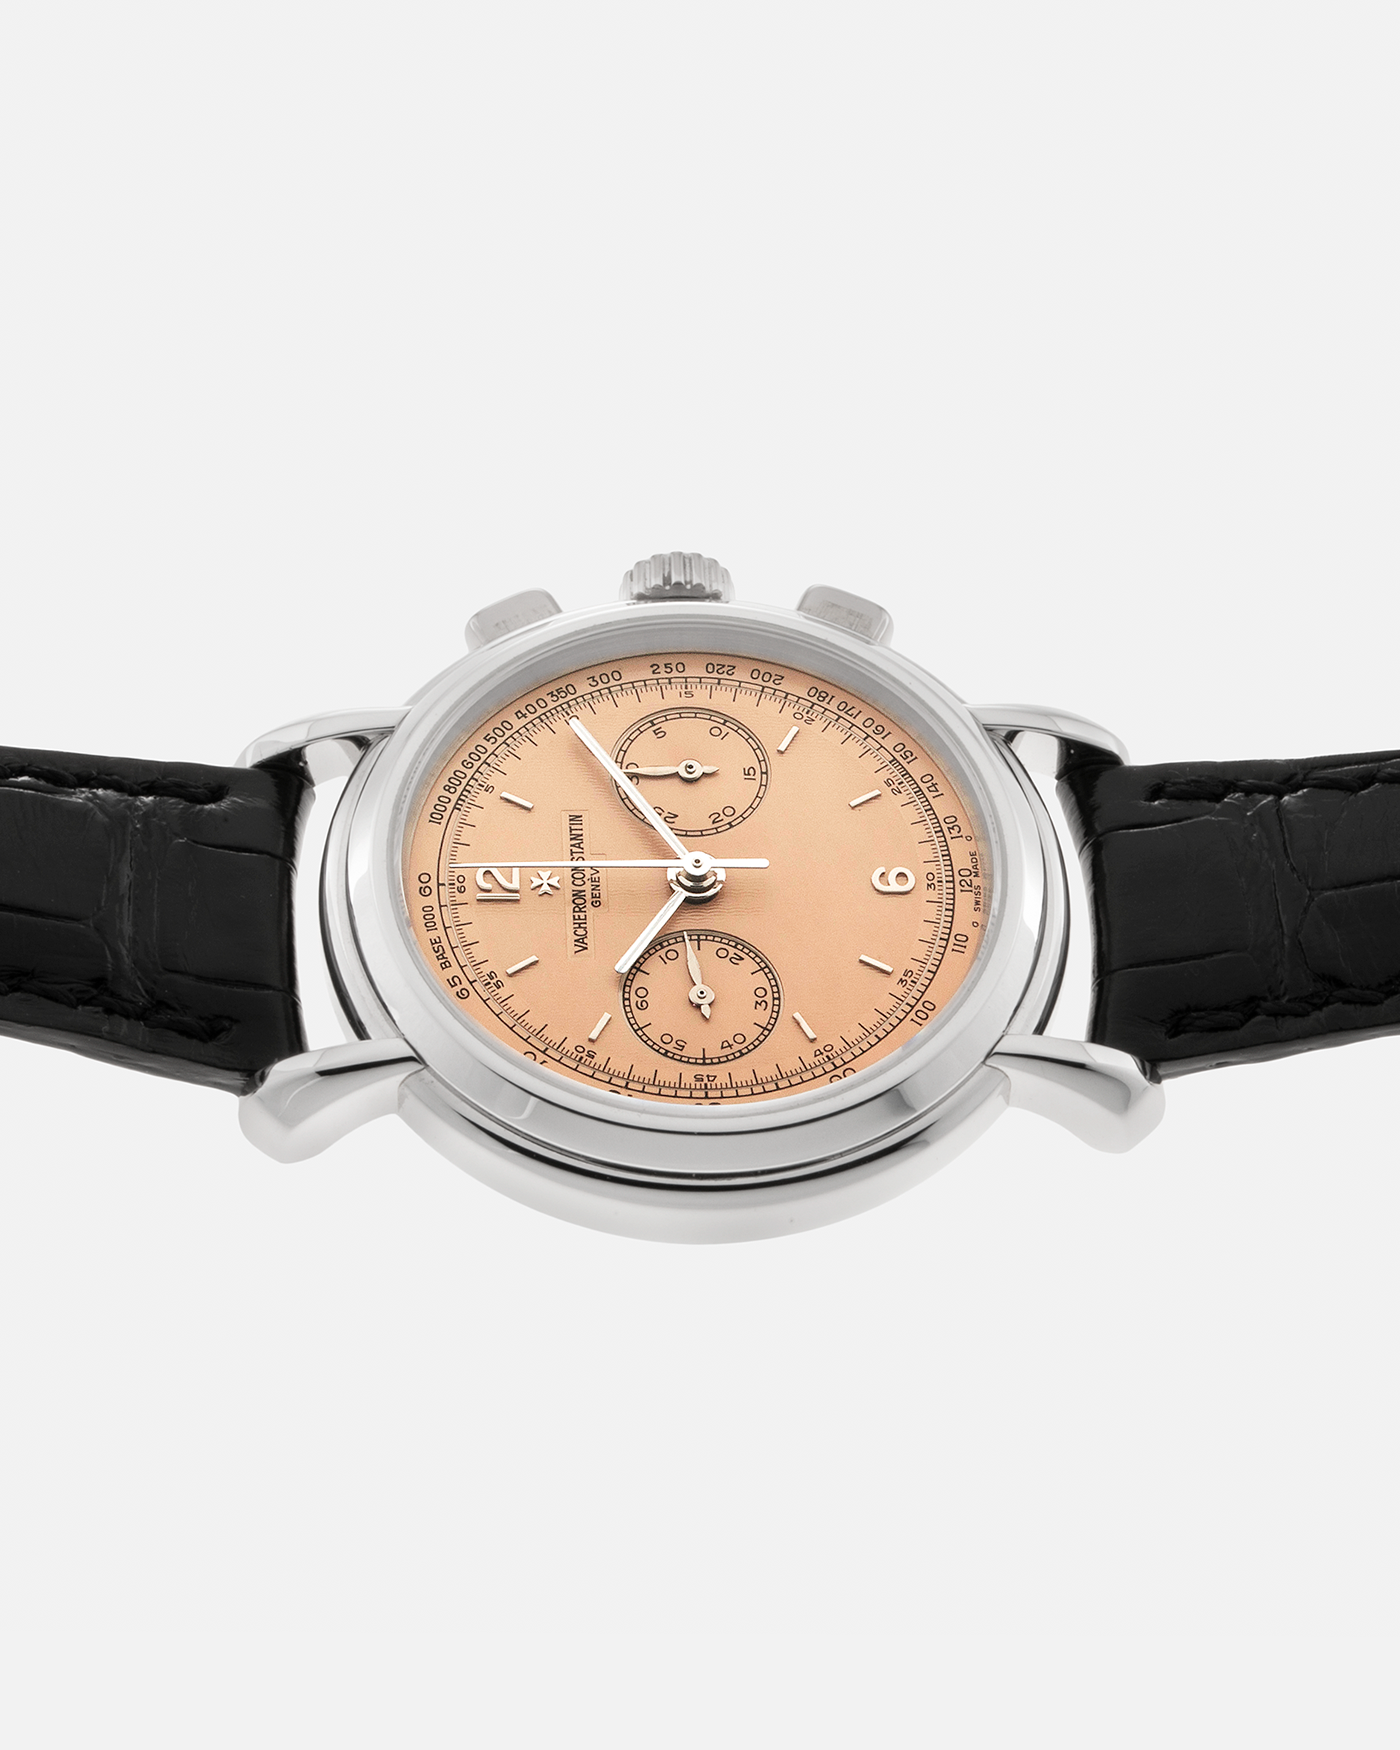 Brand: Vacheron Constantin Year: 1996 Model: Les Historiques Chronograph (Estimated only 60 Examples in this Salmon Dial / Platinum Configuration) Reference Number: 47101/3 Material: Platinum 950 Movement: Lemania 2310 Based Cal. 1140, Manual-Winding Case Diameter: 37mm Lug Width: 18mm Bracelet: Vacheron Constantin Black Alligator Strap and Vacheron Constantin Platinum Tang Buckle